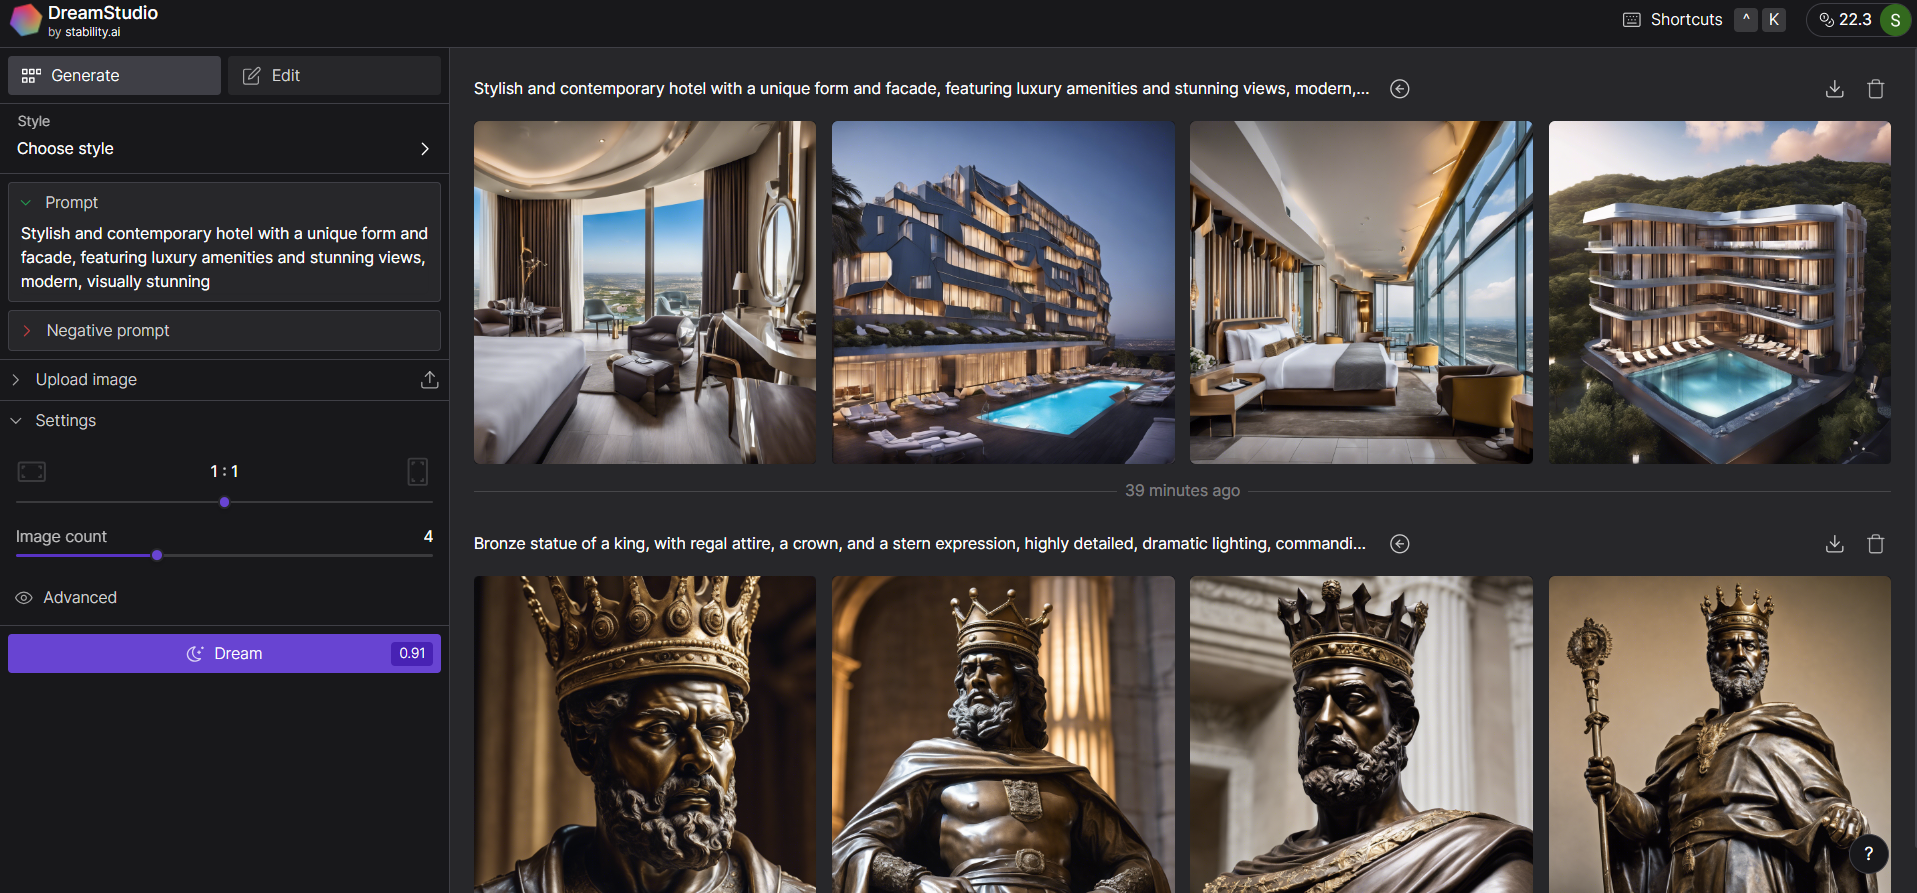 Screenshot of DreamStudio by Stability AI, showcasing an AI-generated image gallery.